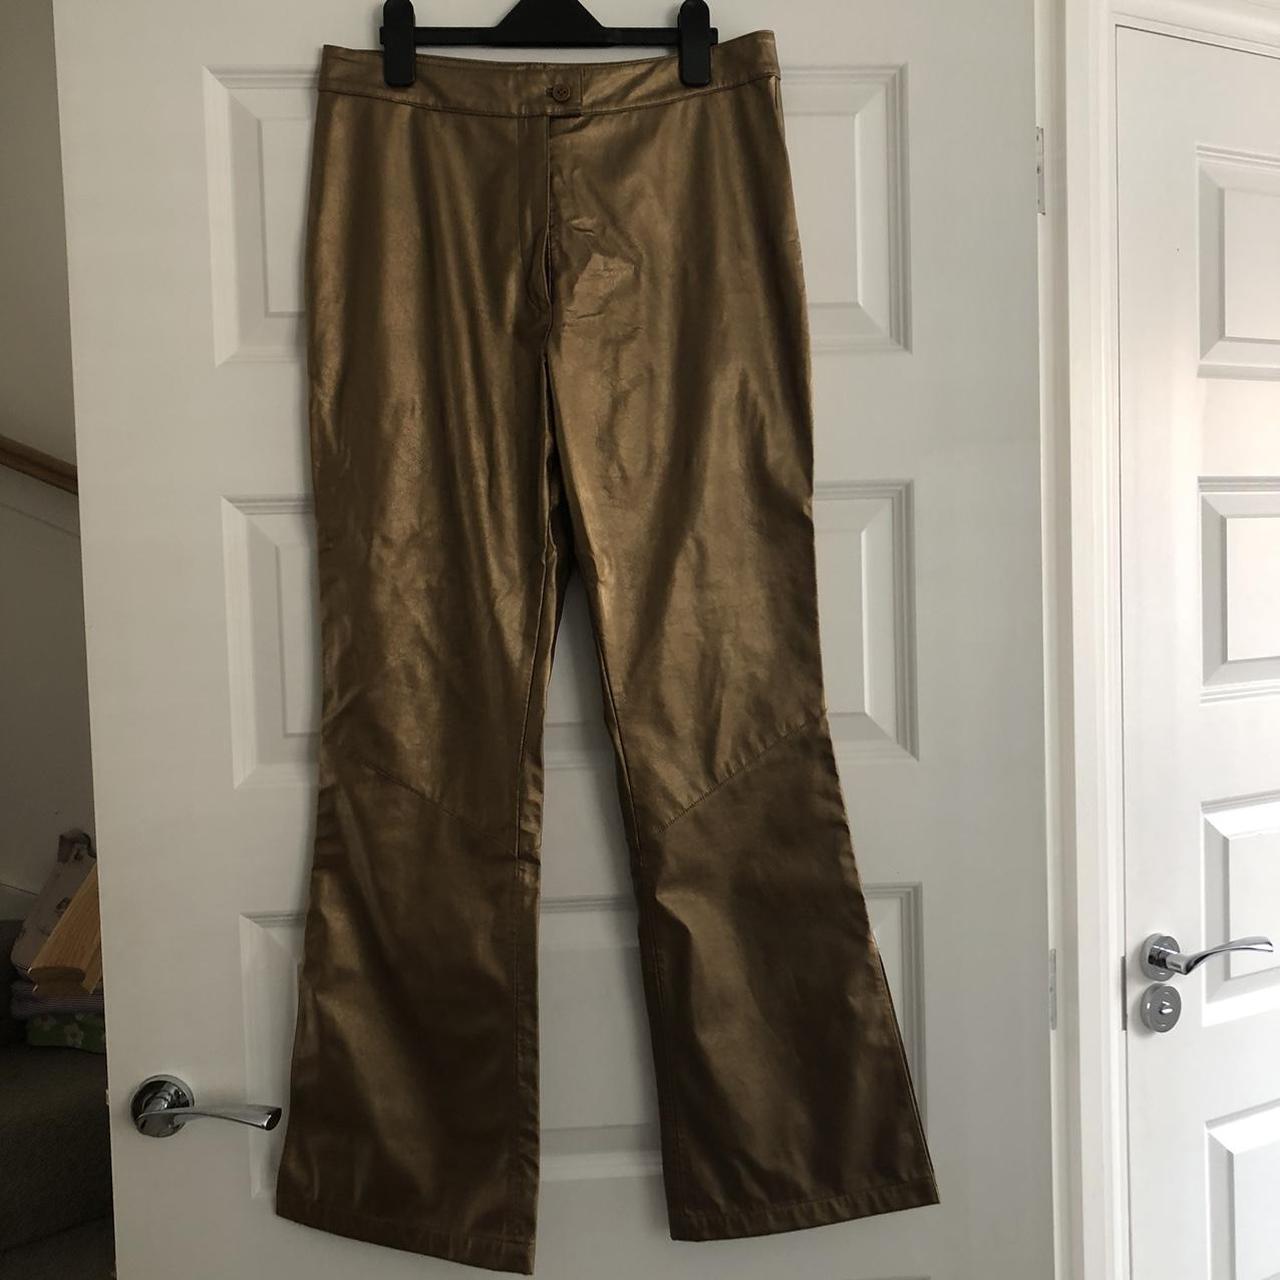 Urban Outfitters Women's Gold Trousers | Depop